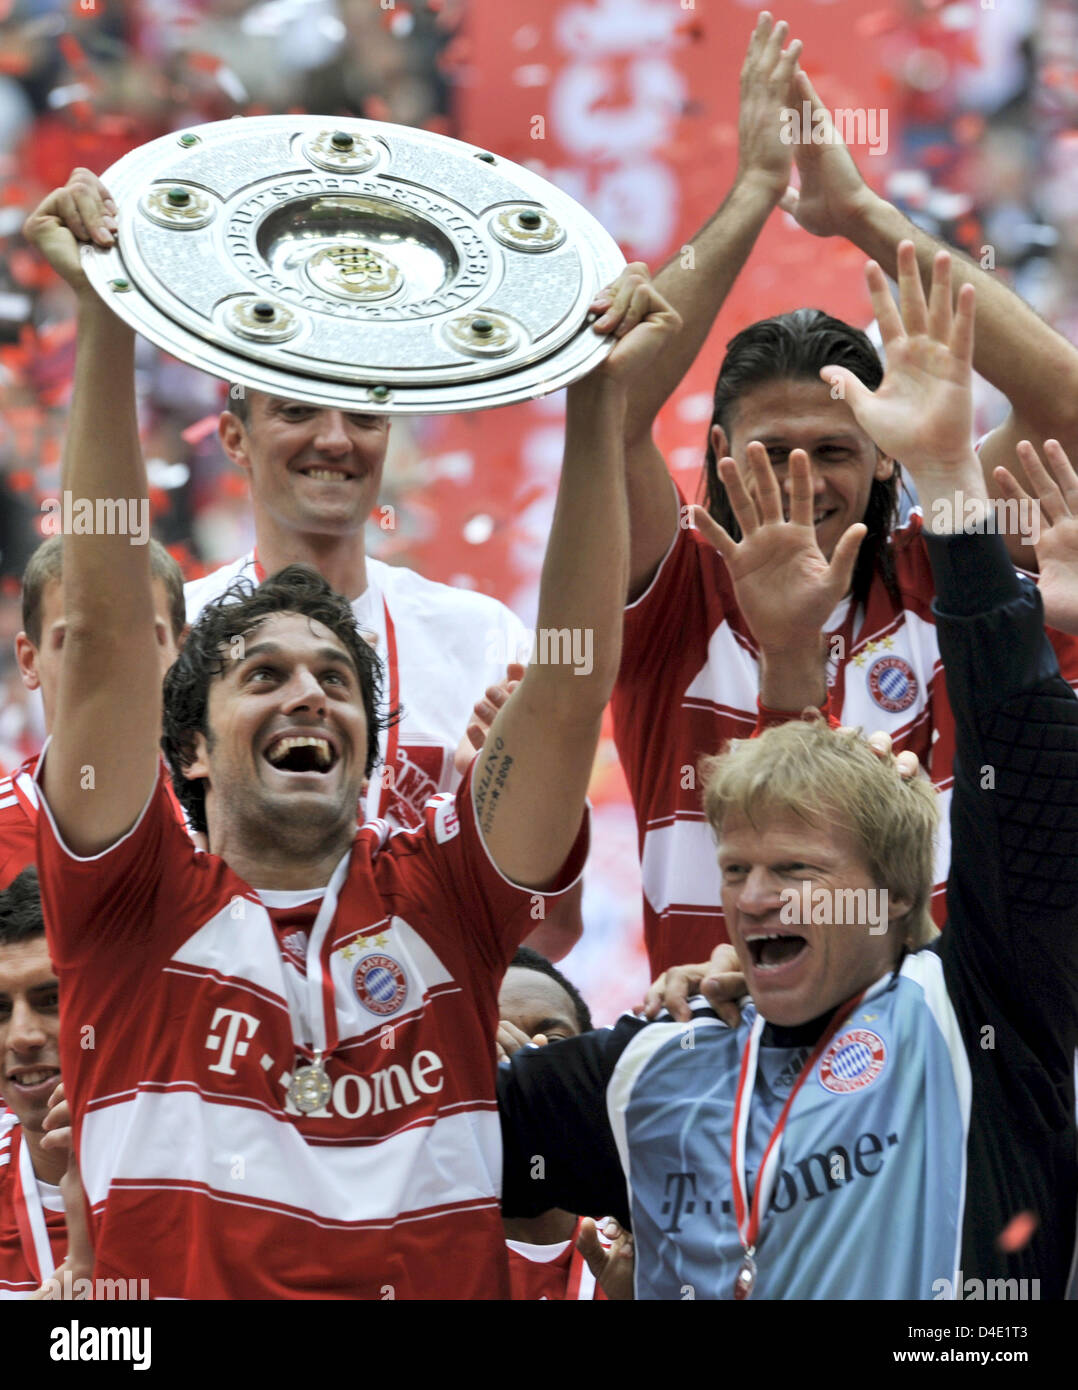 Bayern Munich's goalkeeper Oliver Kahn (R) and teammate Luca Toni (L) celebrate with the championship trophy after the Bundesliga match FC Bayern Munich vs Hertha BSC Berlin at Allianz-Arena in Munich, Germany, 17 May 2008. Bayern Munich defeated Hertha 4-1. Photo: Peter Kneffel Stock Photo